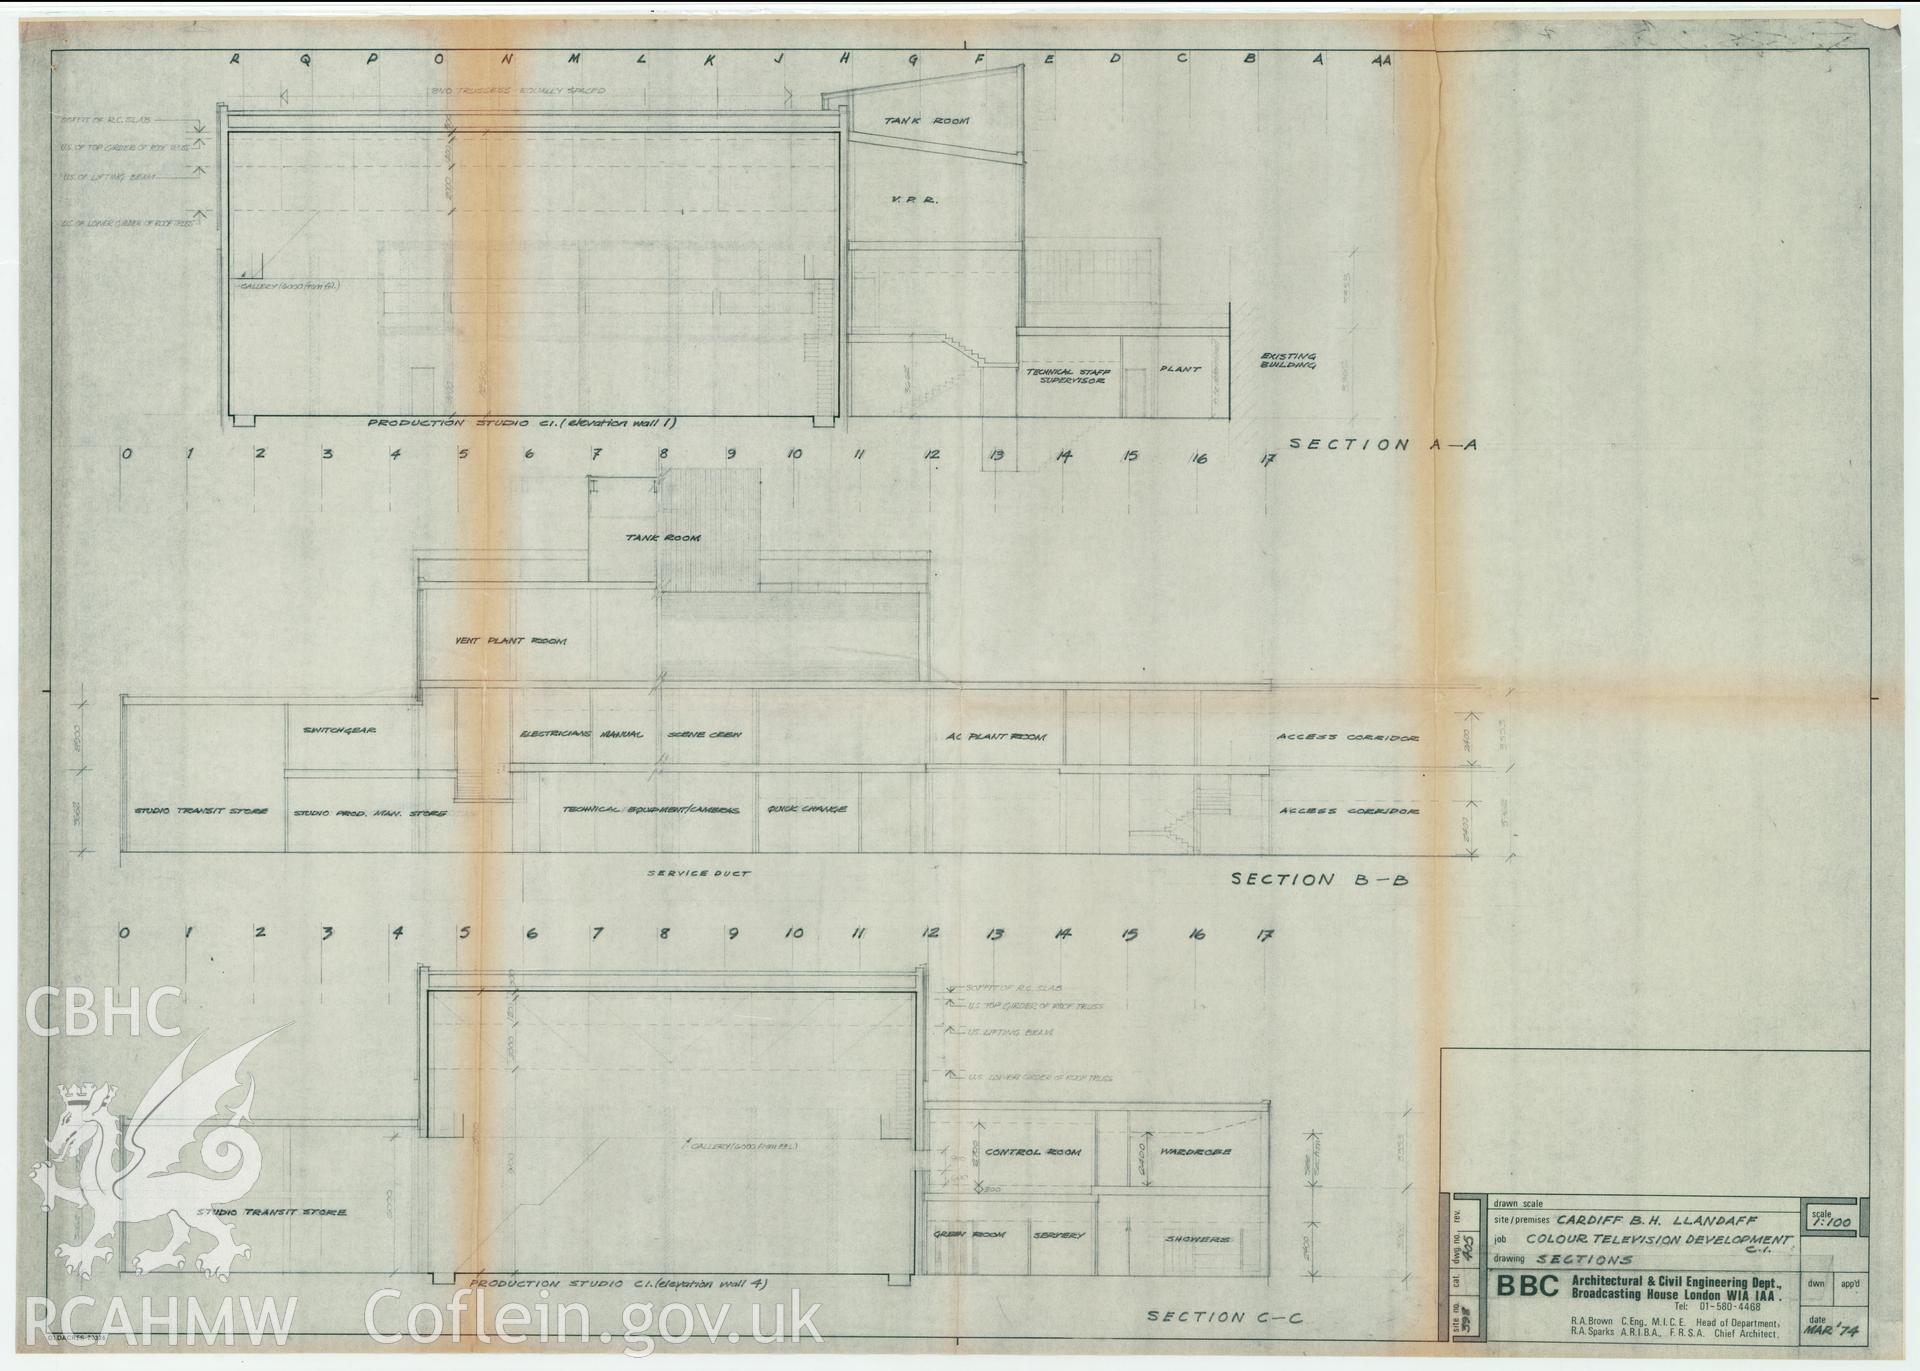 Digitised drawing plan of Llandaff production studio C1 - Colour TV development. Section. Drawing no. 405, March 1974.